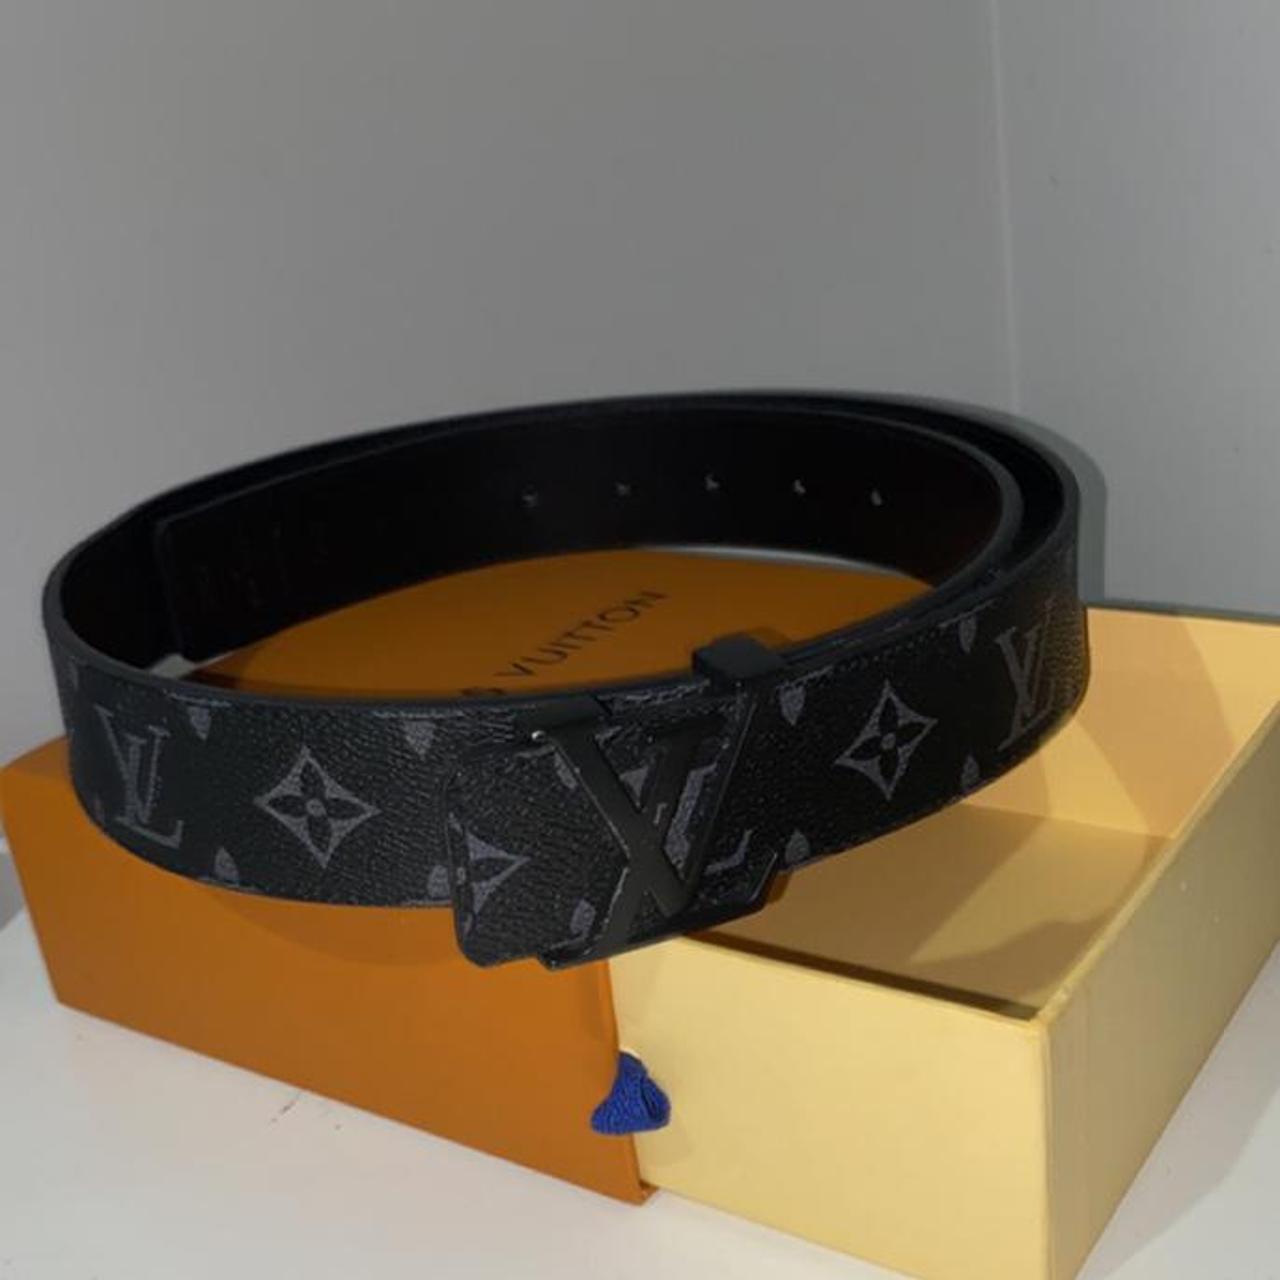 Louis Vuitton belt Like new Bag and box included - Depop